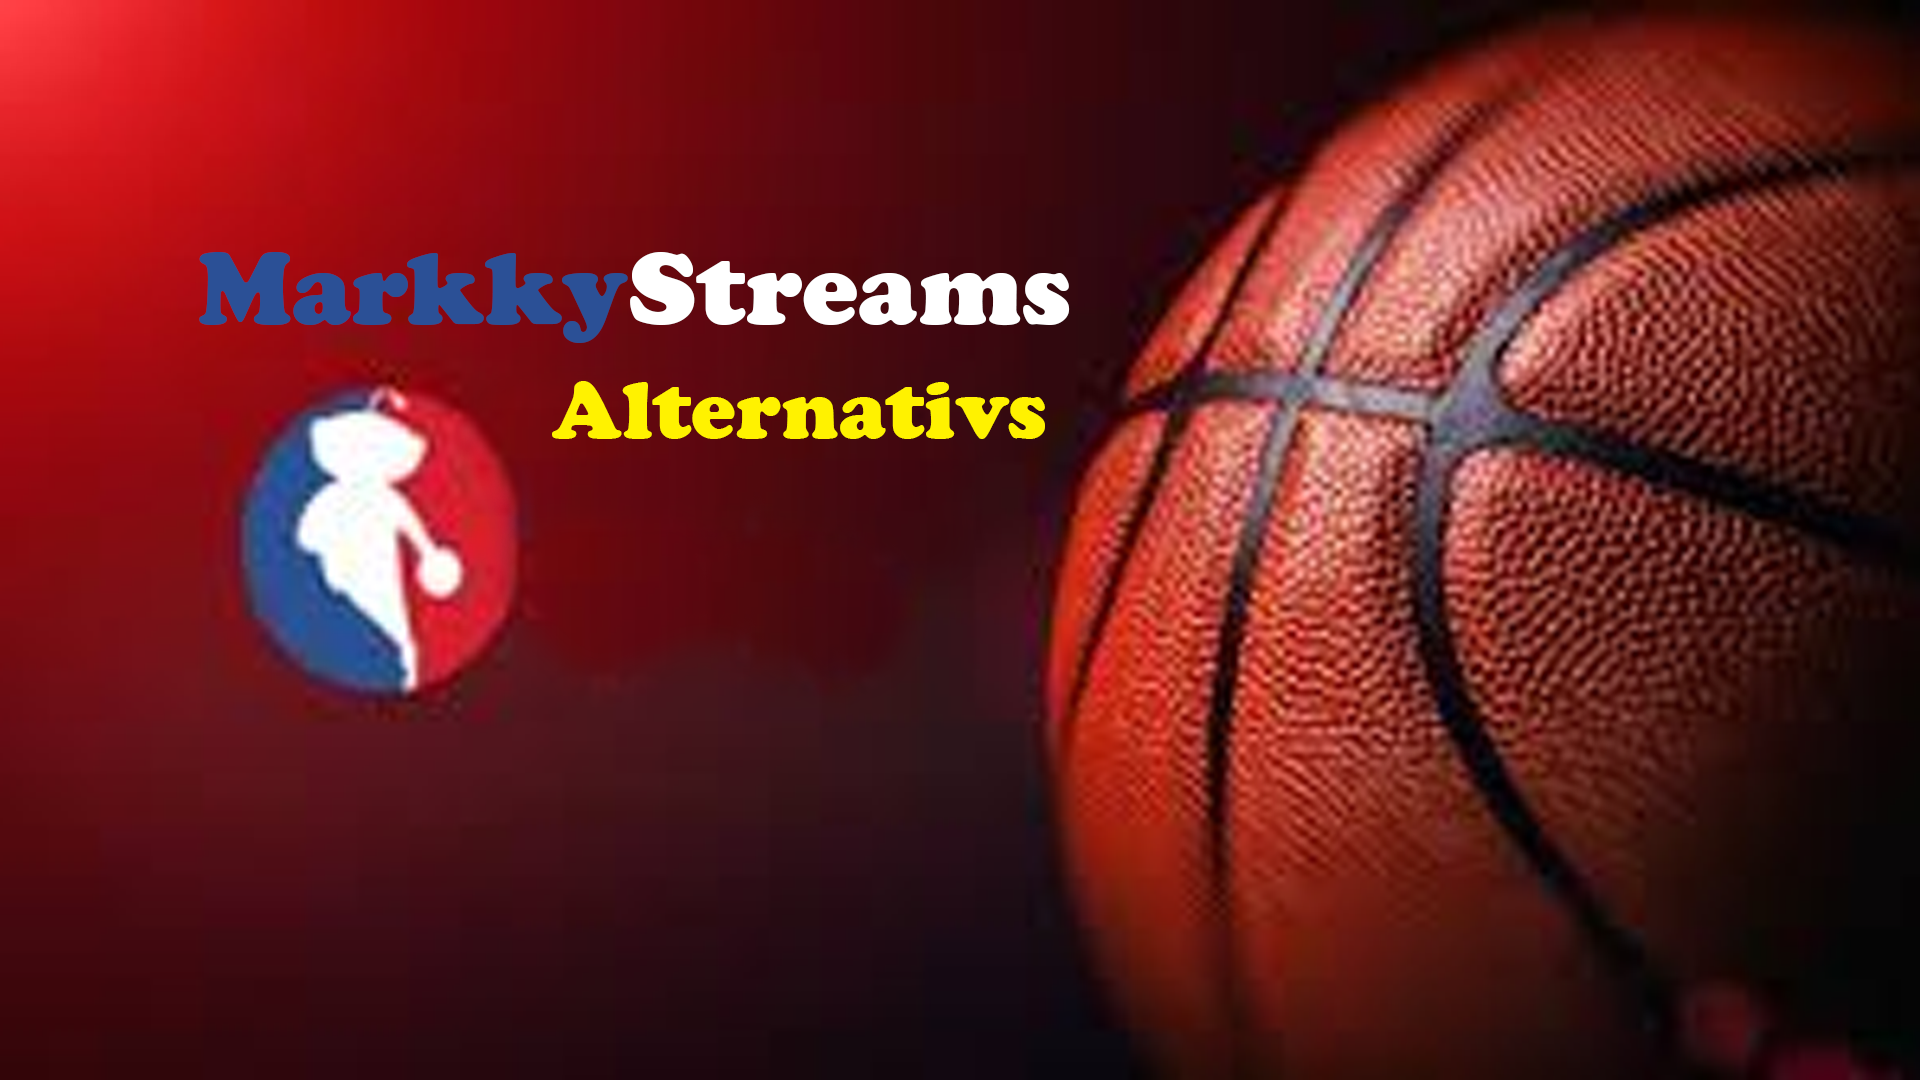 Best Markkystreams AlternativesTop Similar Sites To Watch NFL, NBA, MLB For Live Sports Streaming